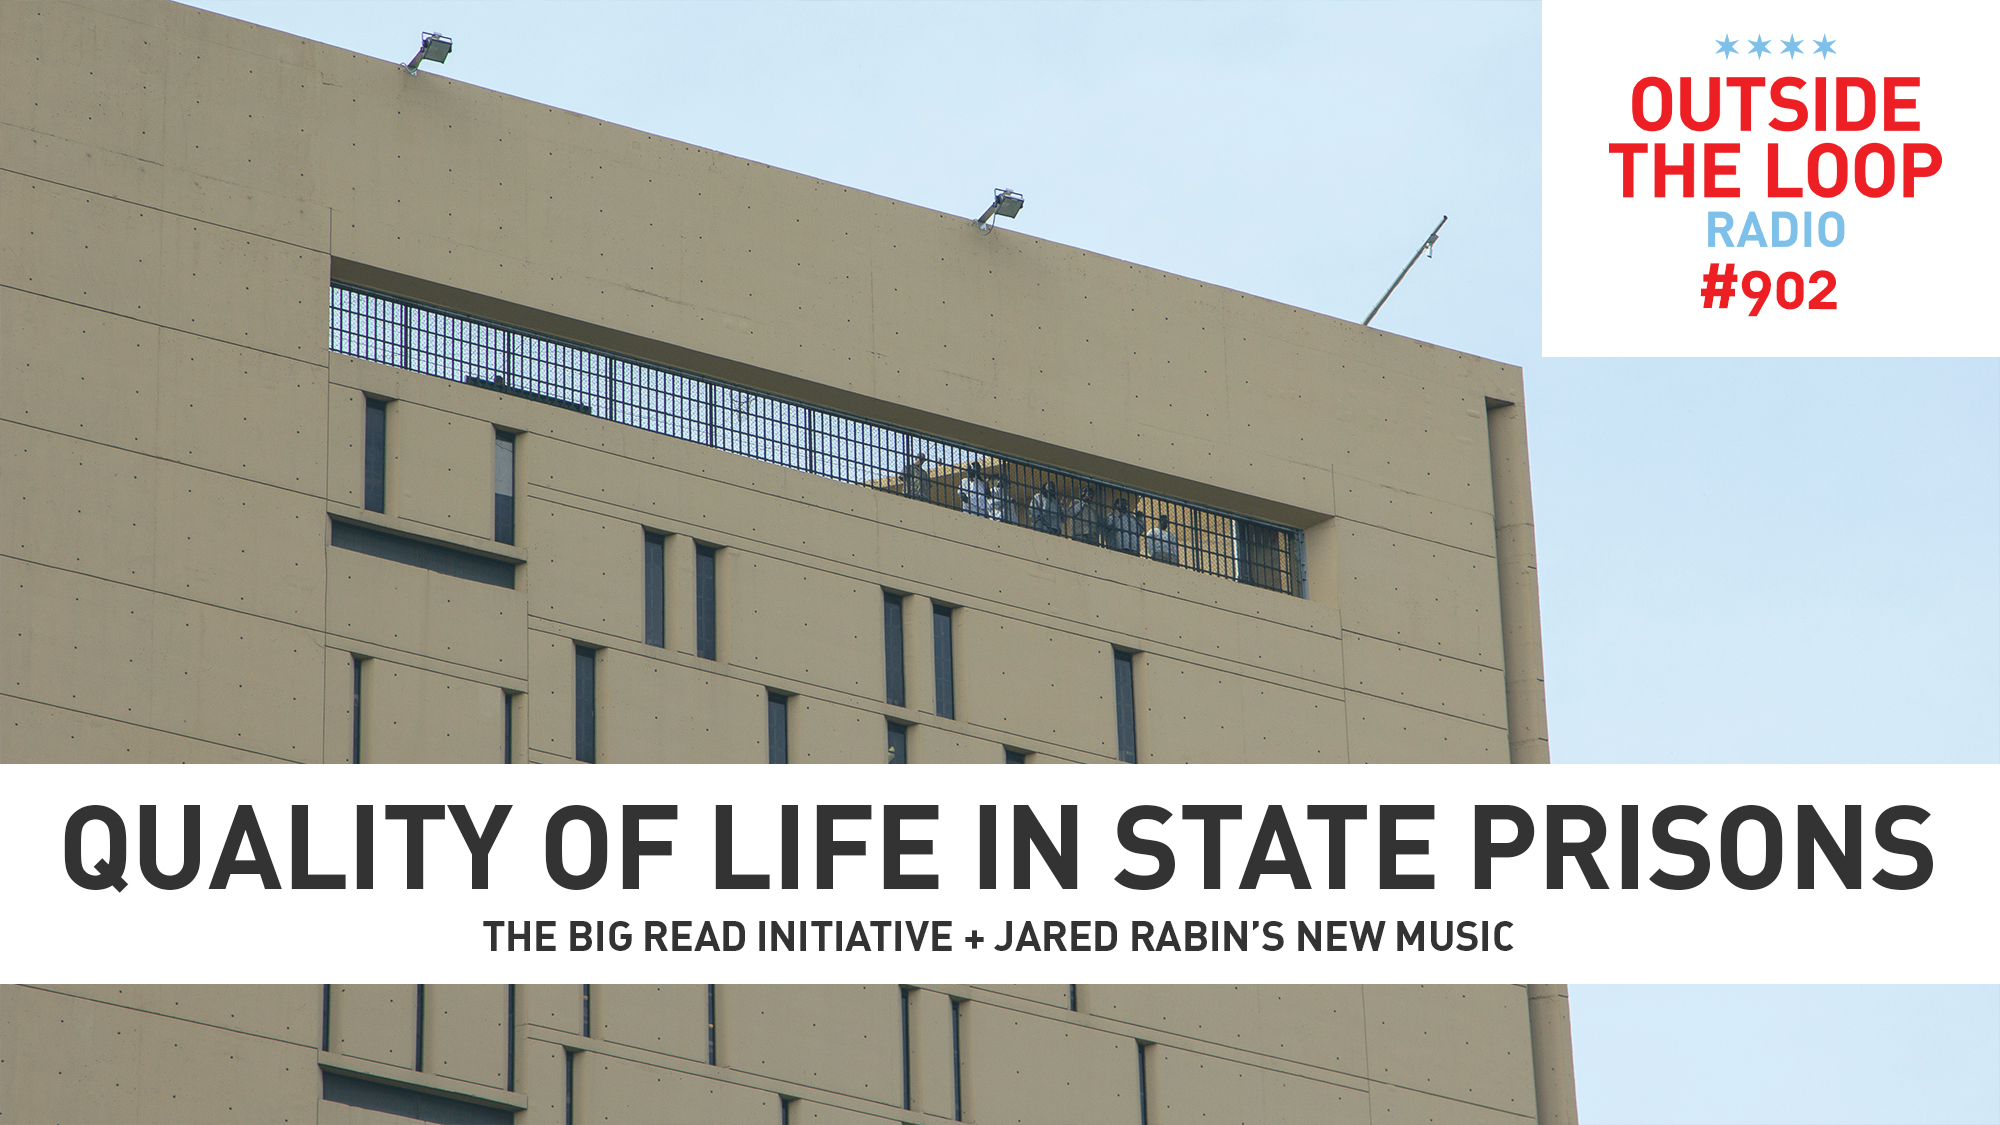 What is the quality of life in Illinois state prisons? (Photo credit: Mike Stephen/WGN Radio)